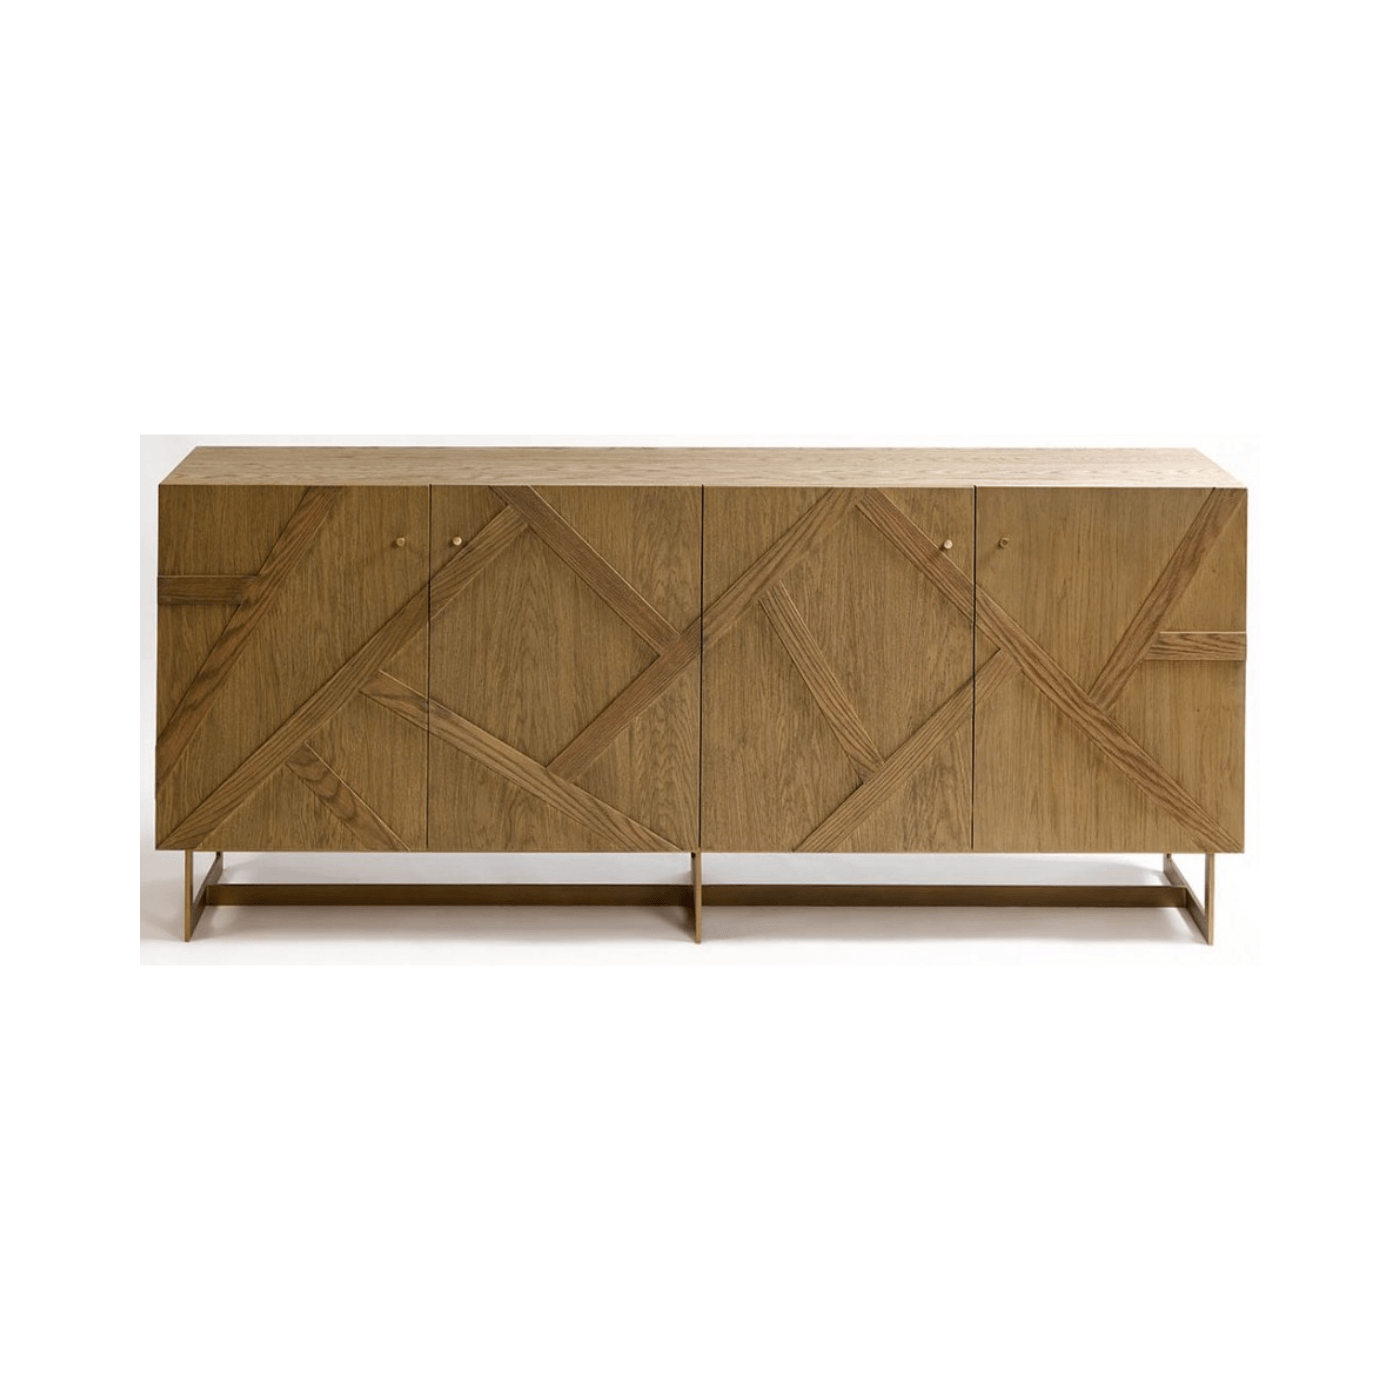 Olmo Natural Oak Sideboard with Gold Metal Legs - Maison Rêves UK